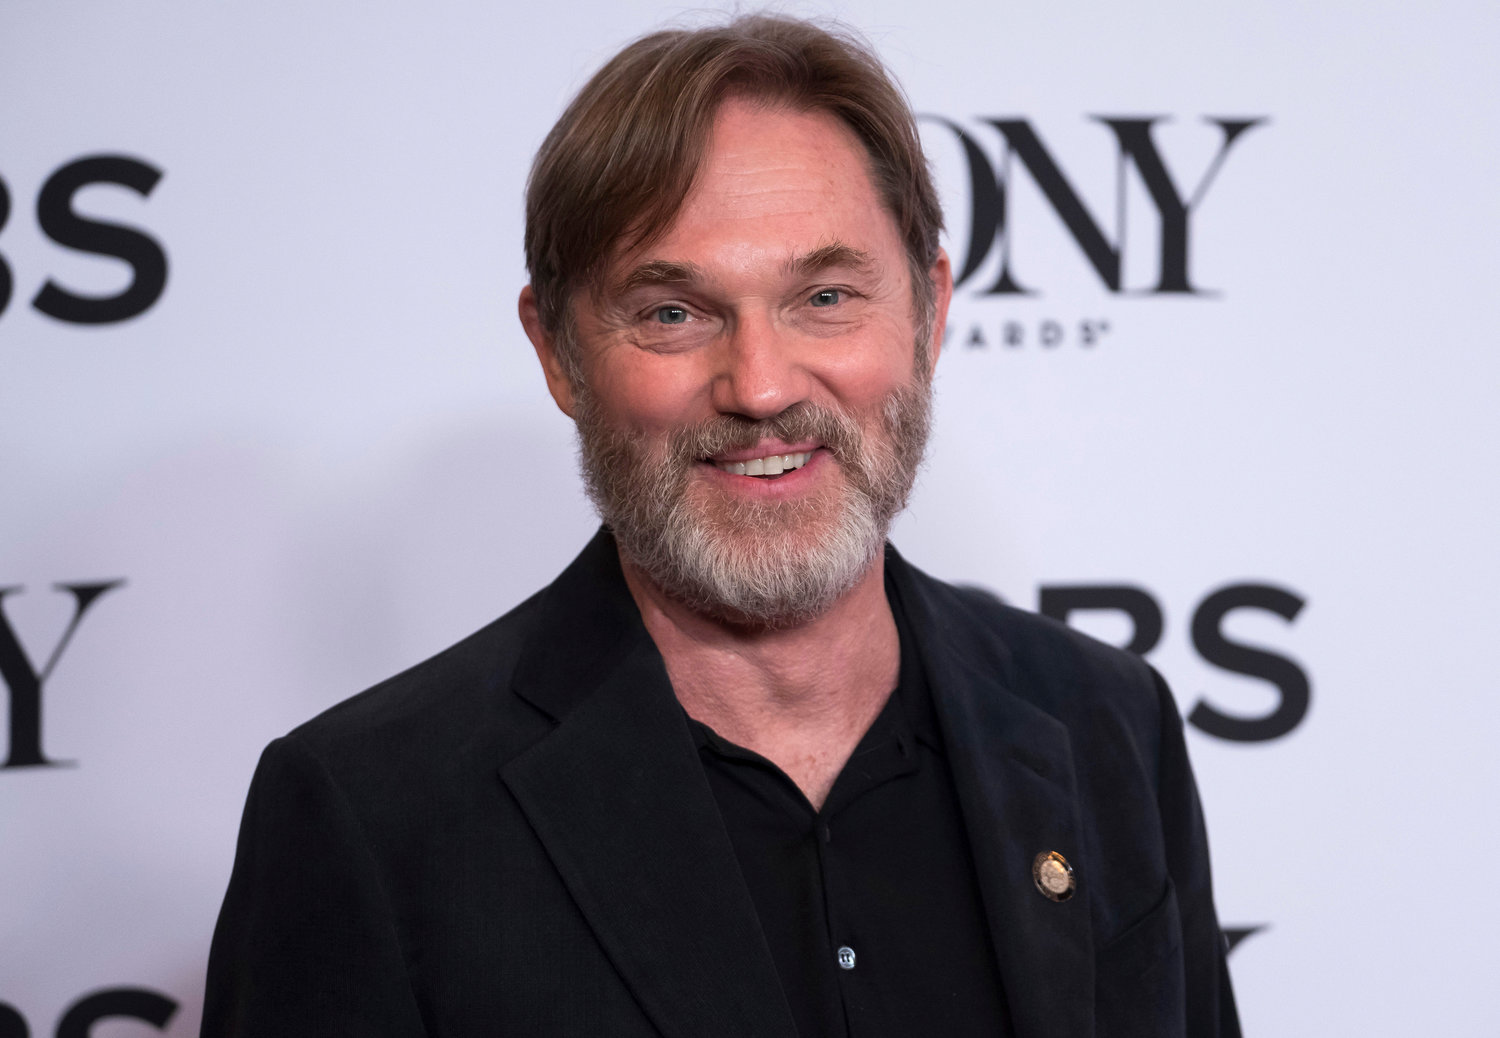 Richard Thomas participates in the 2017 Tony Awards Meet the Nominees press day at the Sofitel New York hotel on Wednesday, May 3, 2017, in New York. Now 71 and starring as lawyer Atticus Finch in a touring production of “To Kill a Mockingbird,” the former “The Waltons” star said he still hears fans call “Good night, John-Boy!” after each performance.